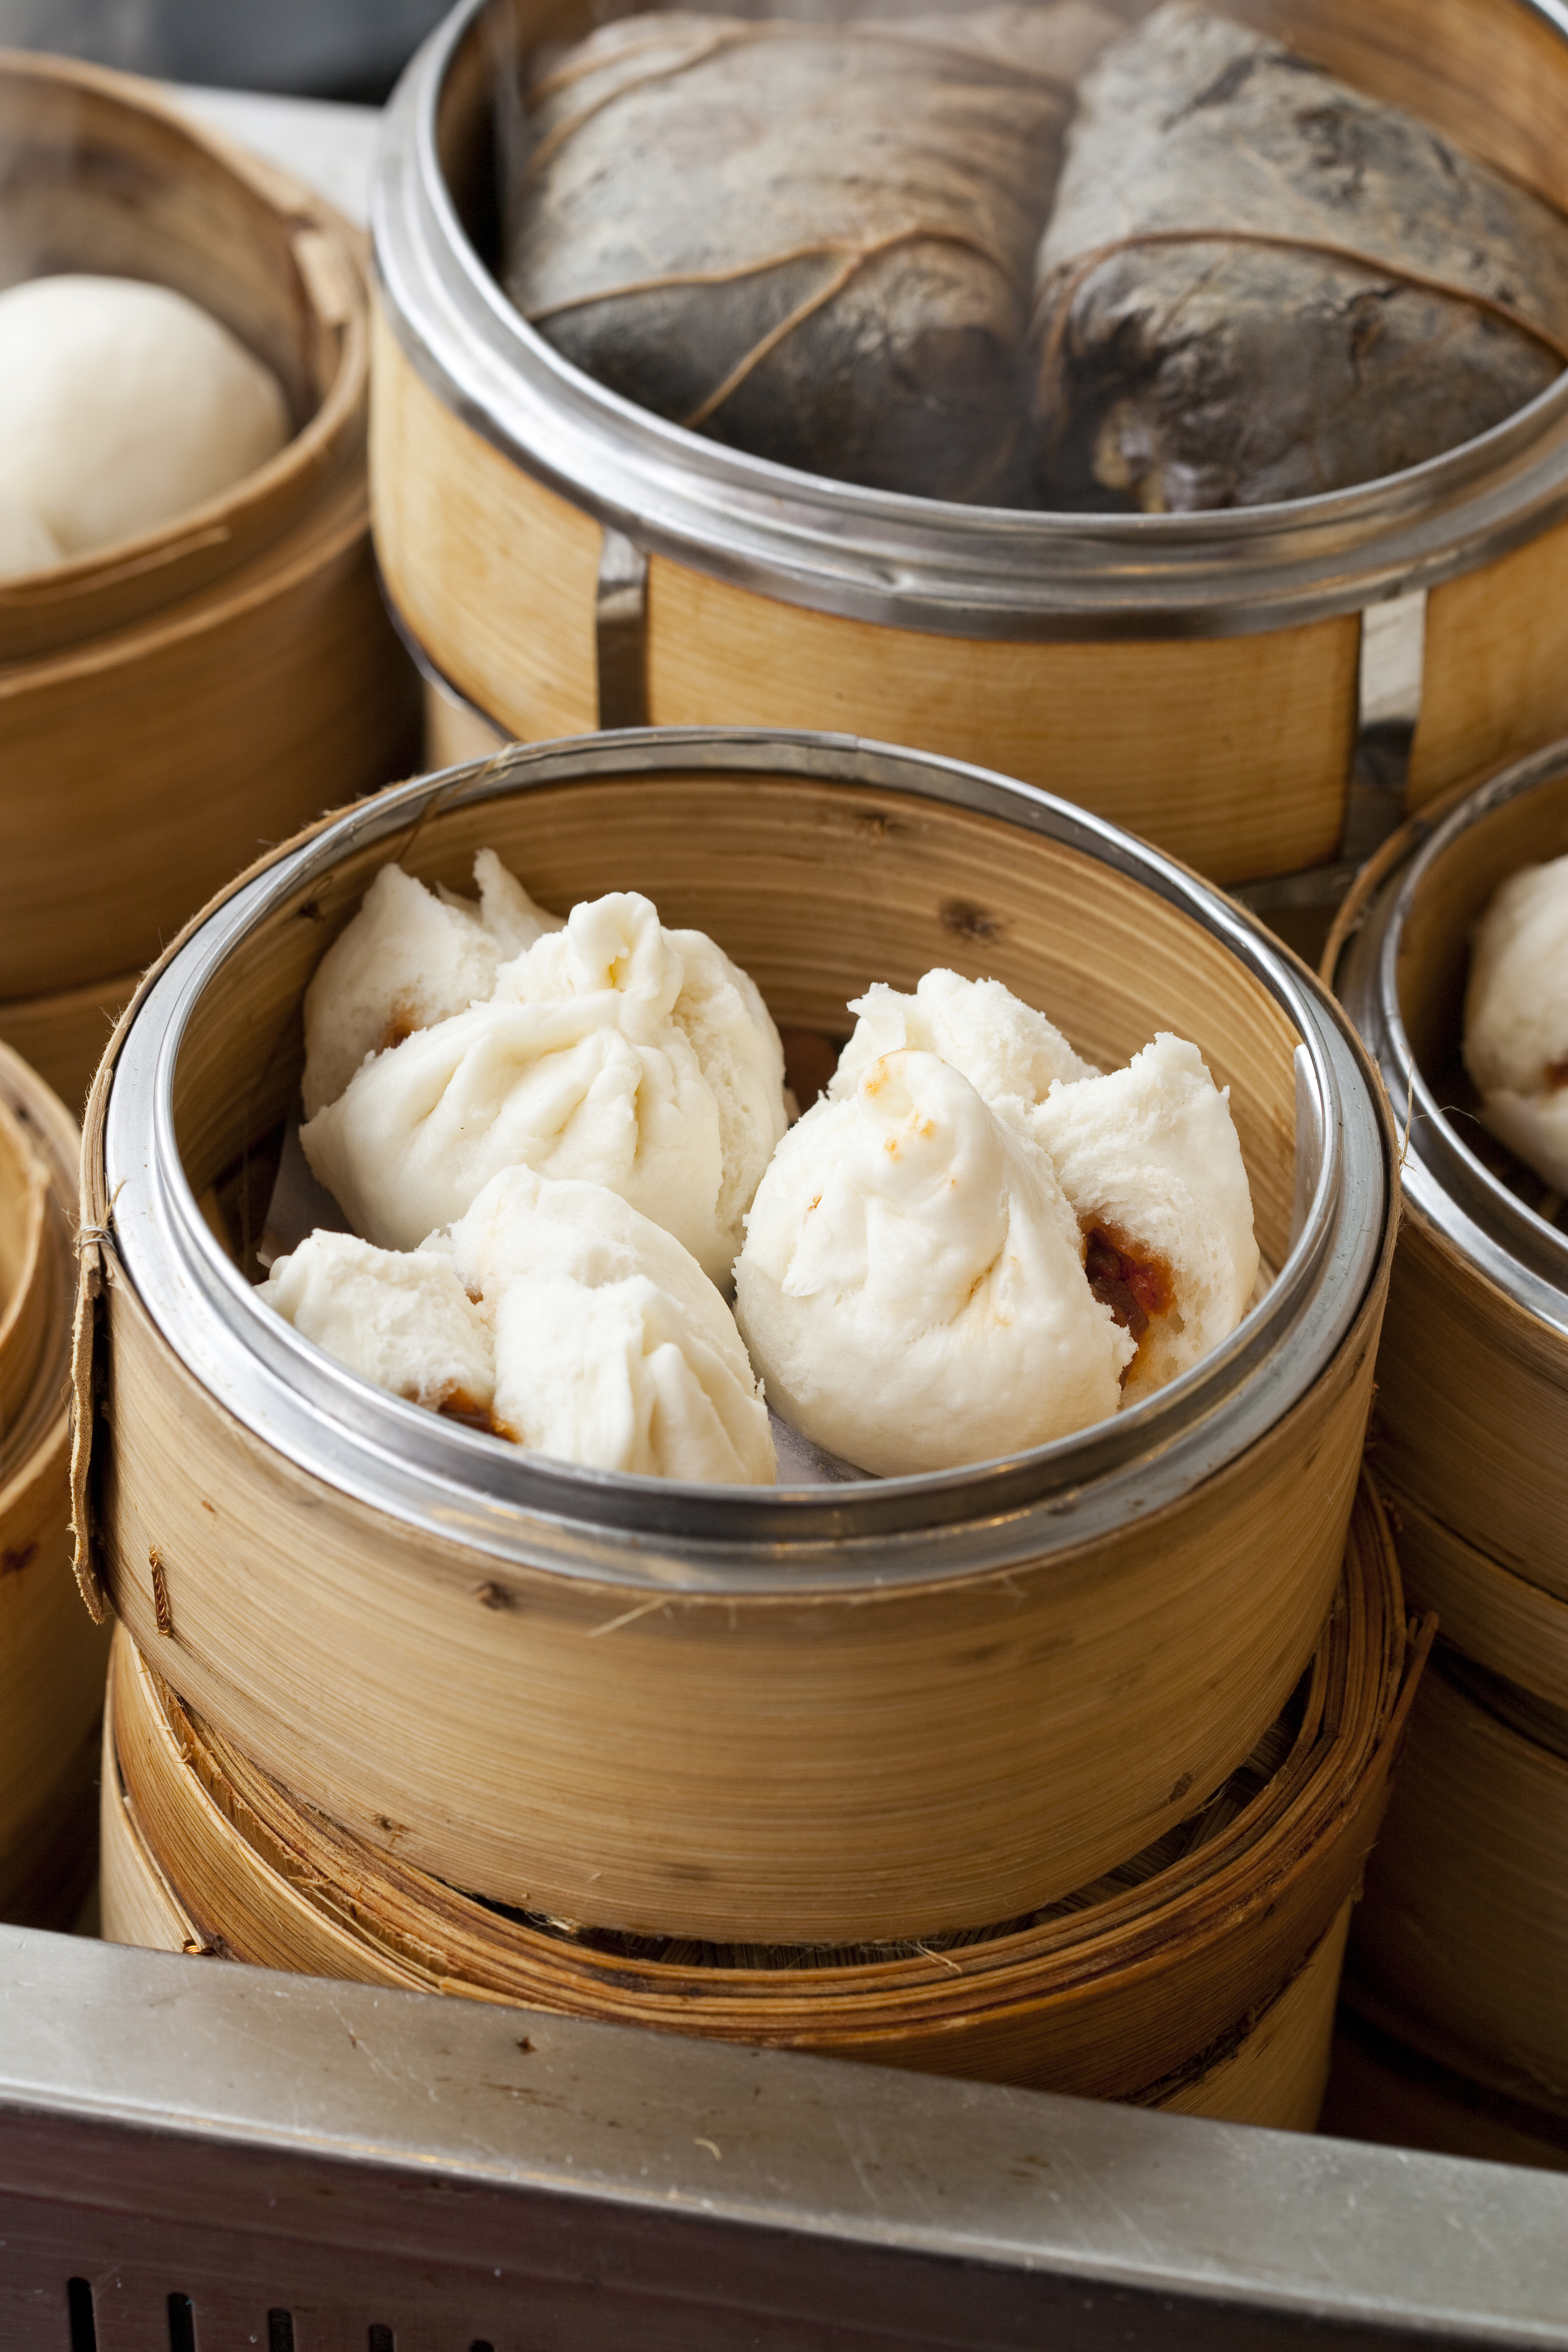 Hei La Moon is a dim sum classic that was hit hard during the pandemic.  Now is a good time to deliciously support it.